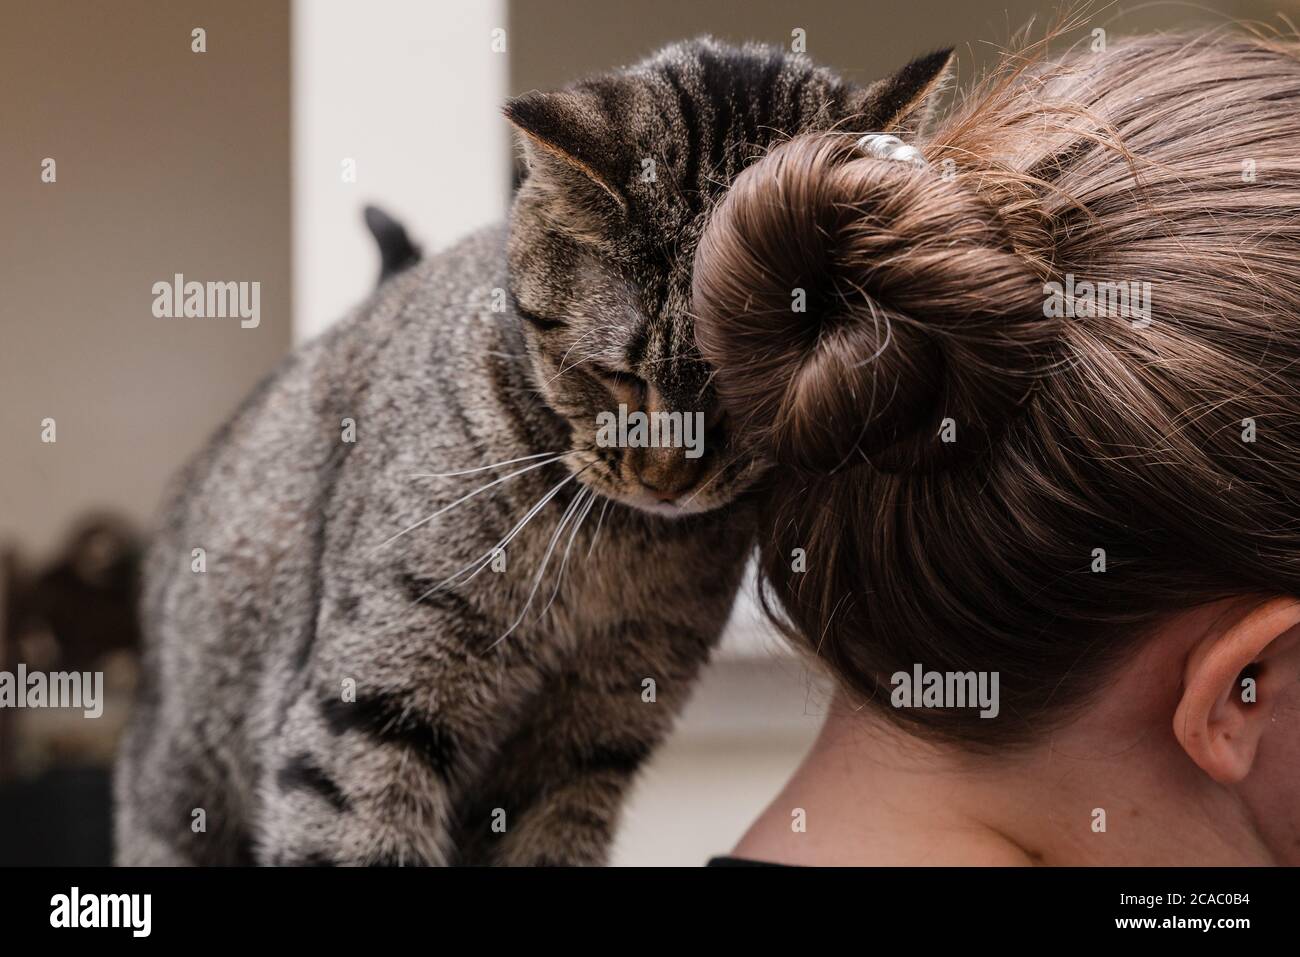 Affectionate tabby cat snuggling on hair Stock Photo